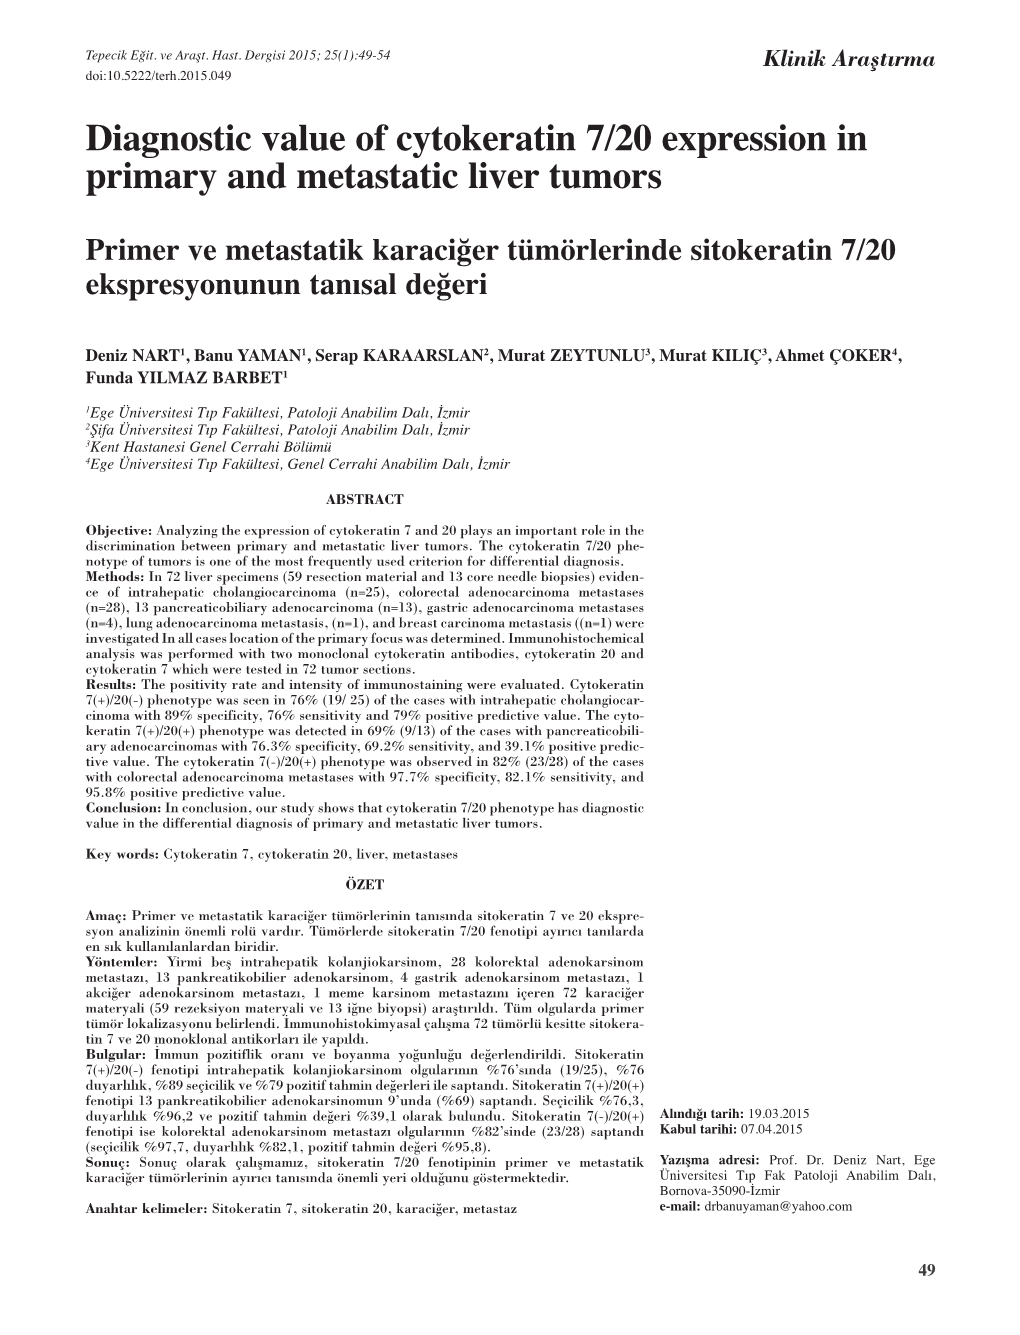 Diagnostic Value of Cytokeratin 7/20 Expression in Primary and Metastatic Liver Tumors